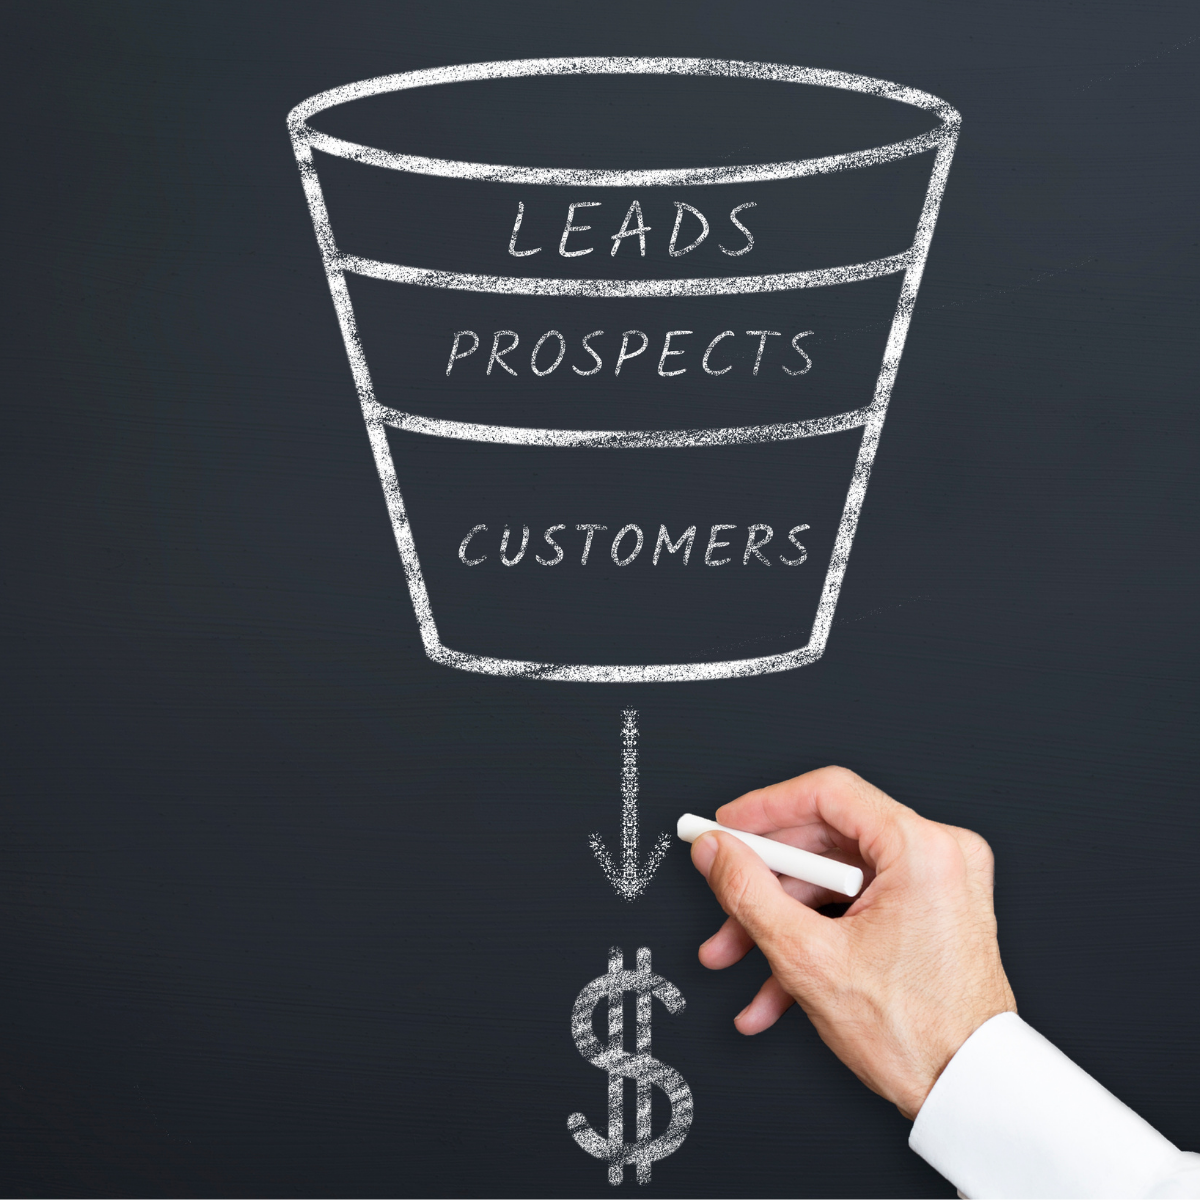 marketing leads, prospects, and customers